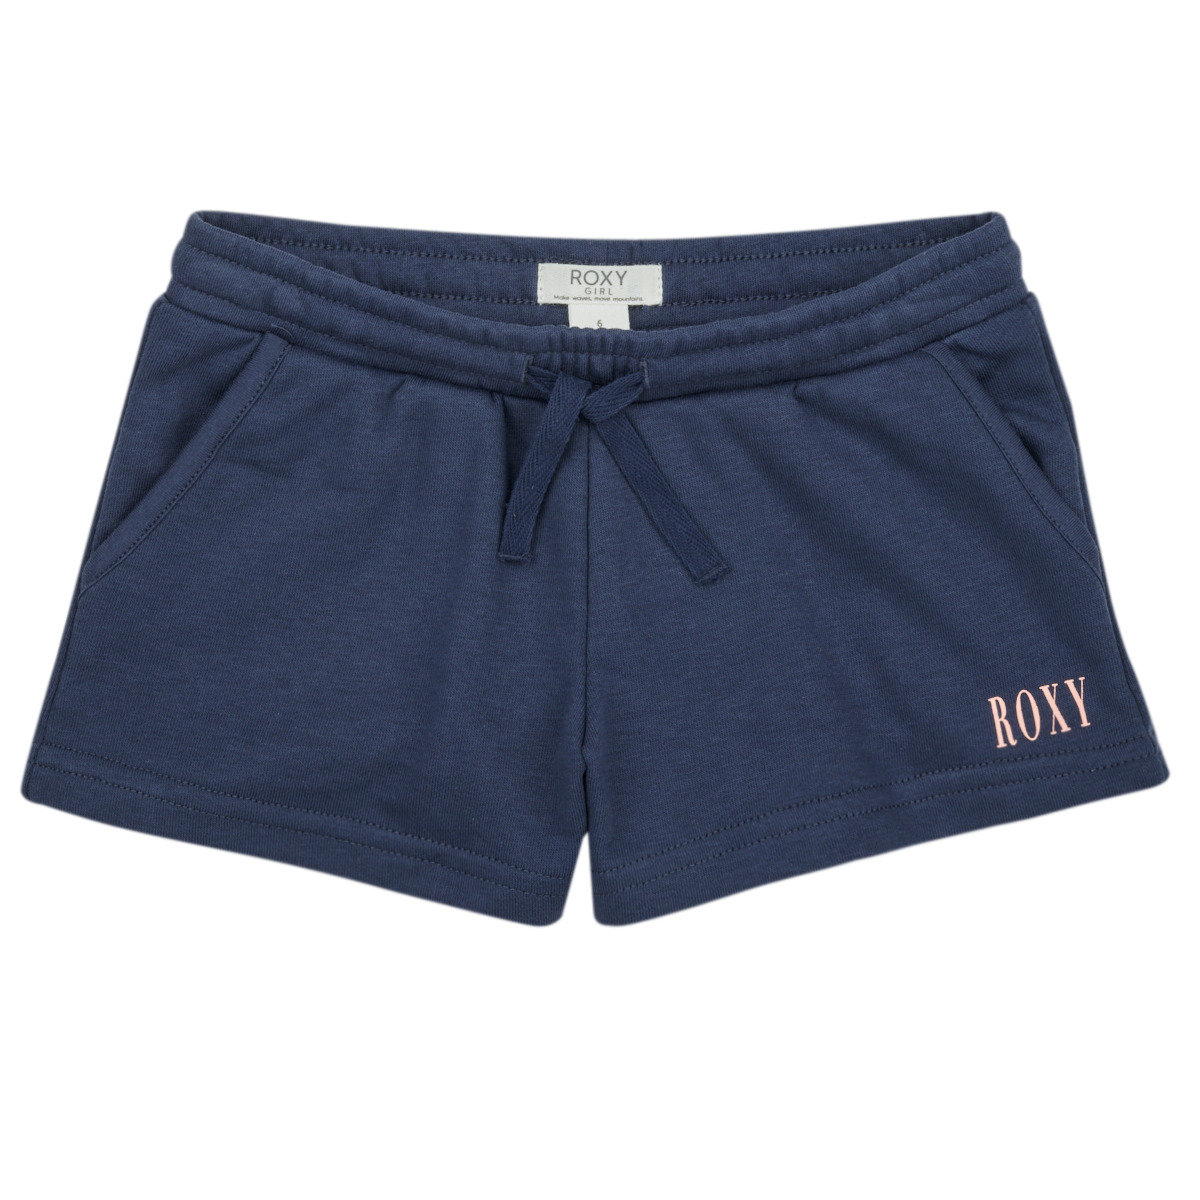 Roxy HAPPINESS - - Shorts delivery Bermudas Free SHORT | ORIGIN ! Child Marine / Clothing Spartoo FOREVER NET